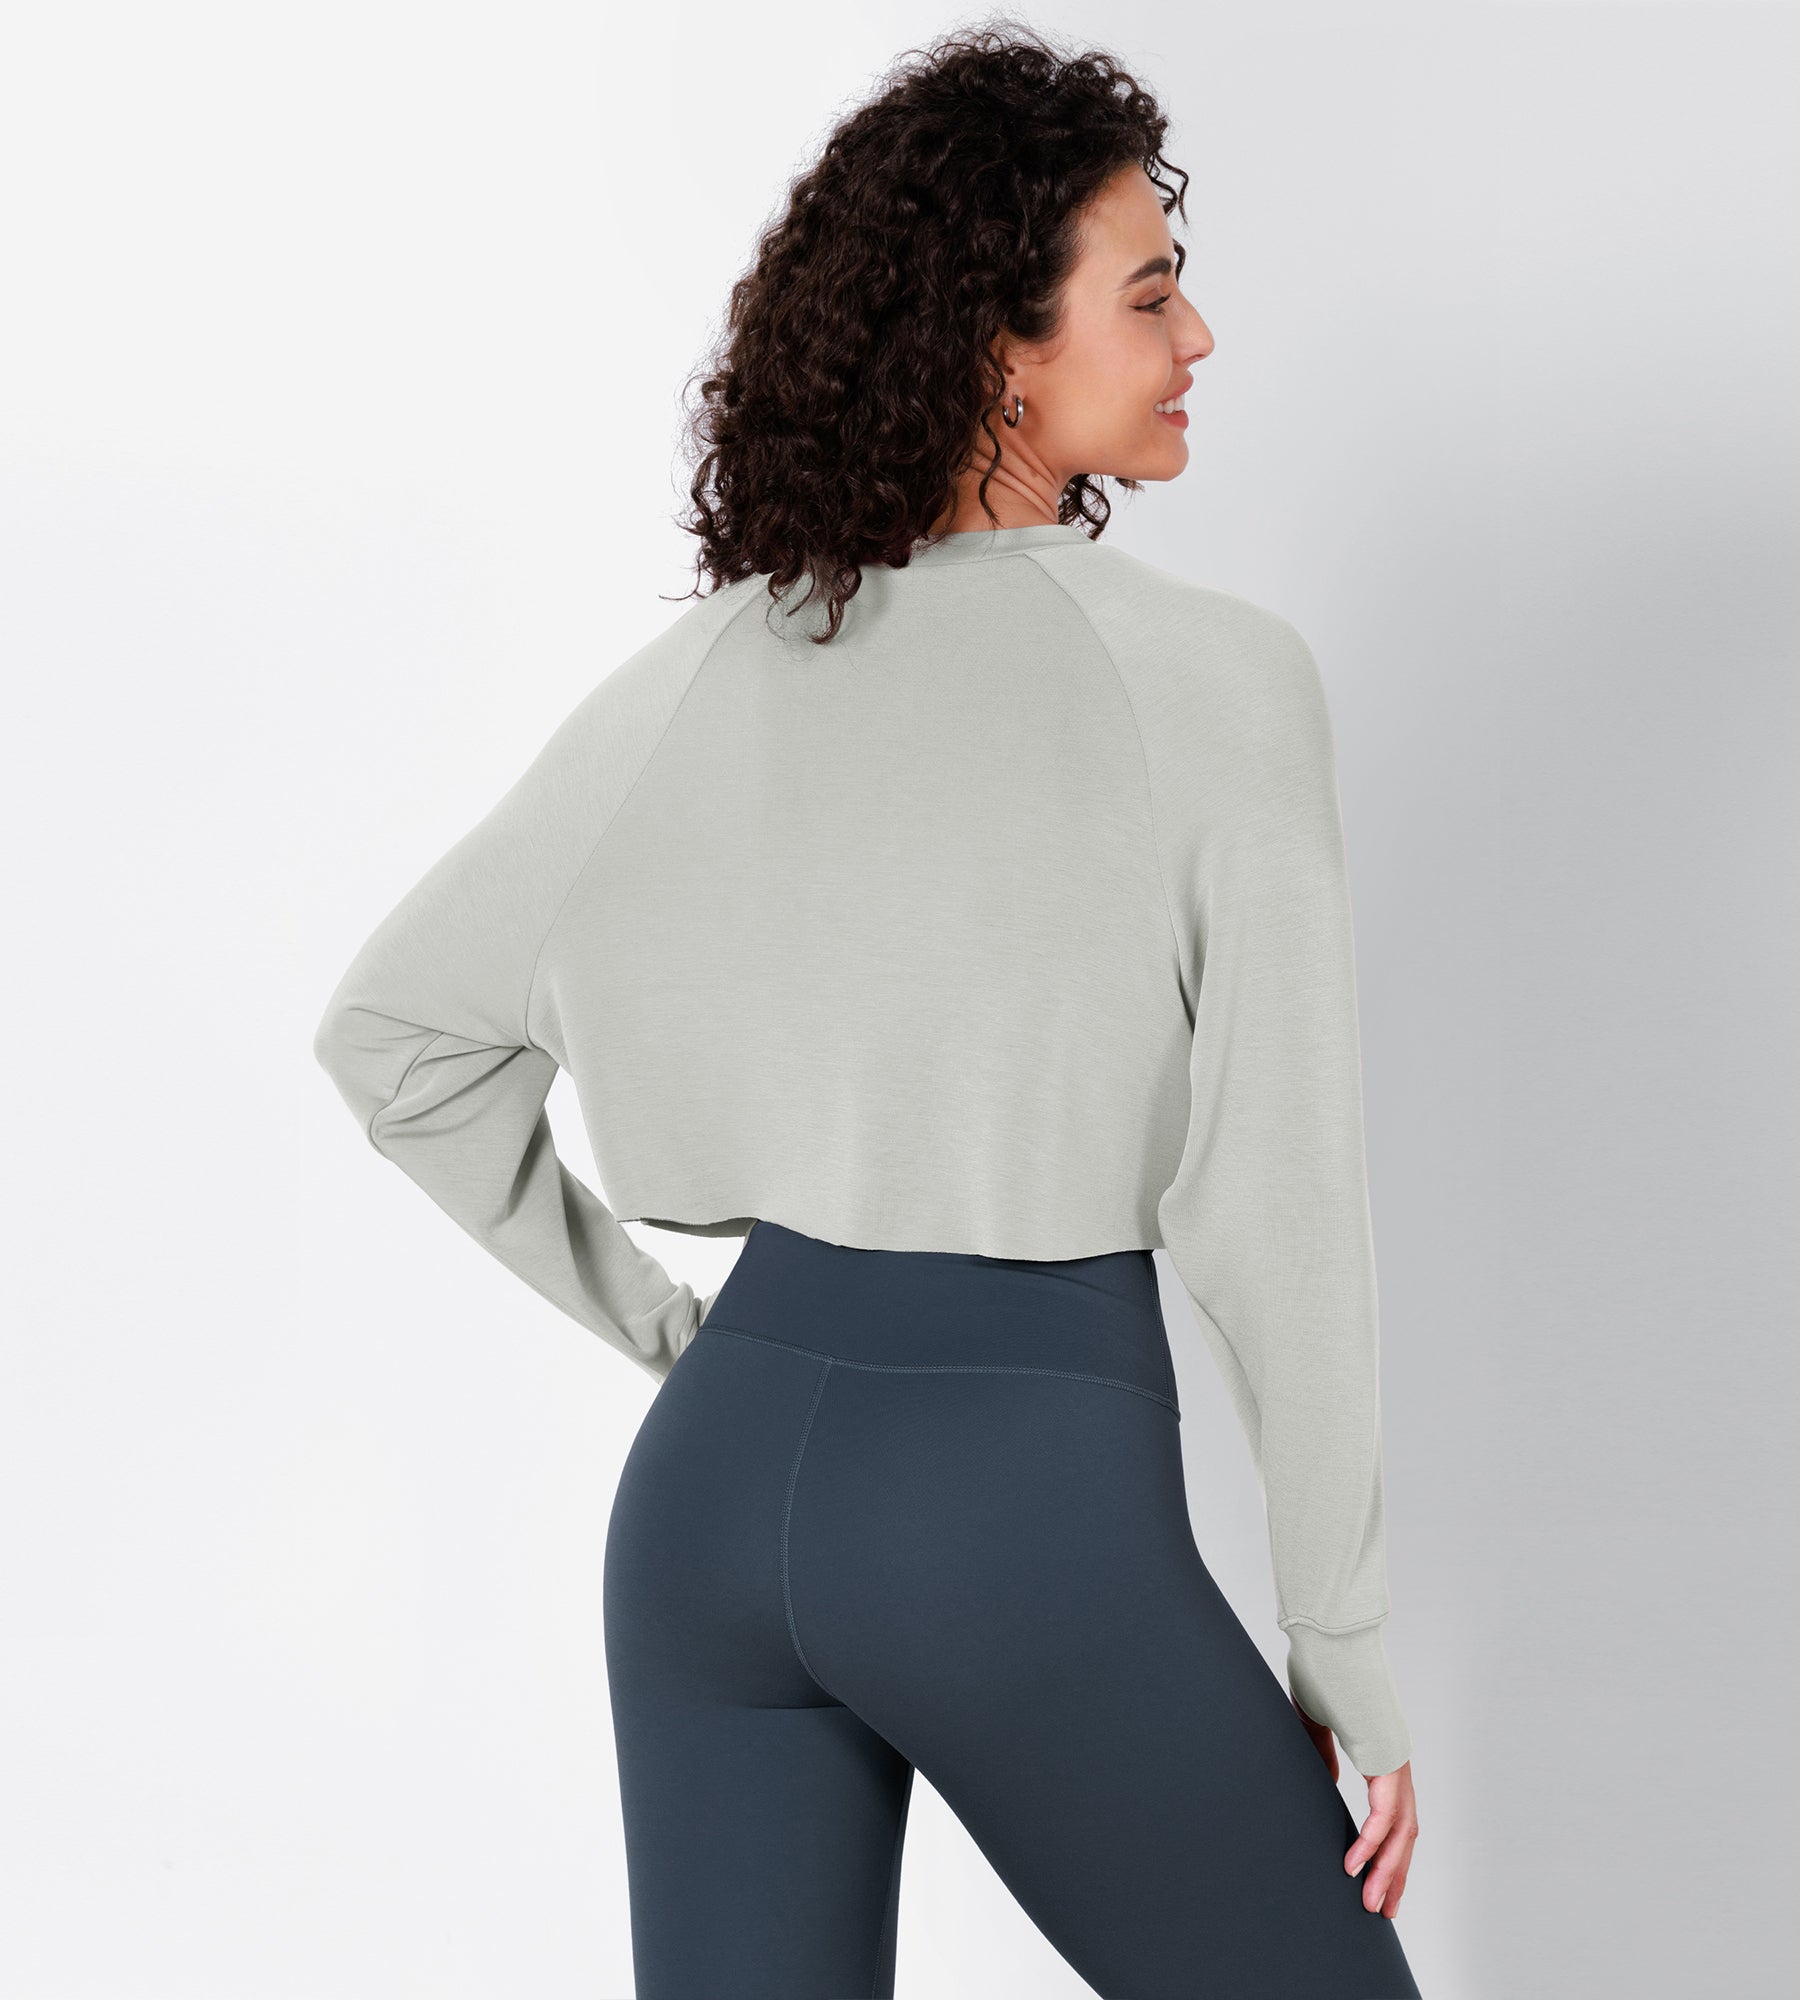 Modal Soft Long Sleeve Cropped Sweatshirts with Thumb Hole Frosted Mint - ododos